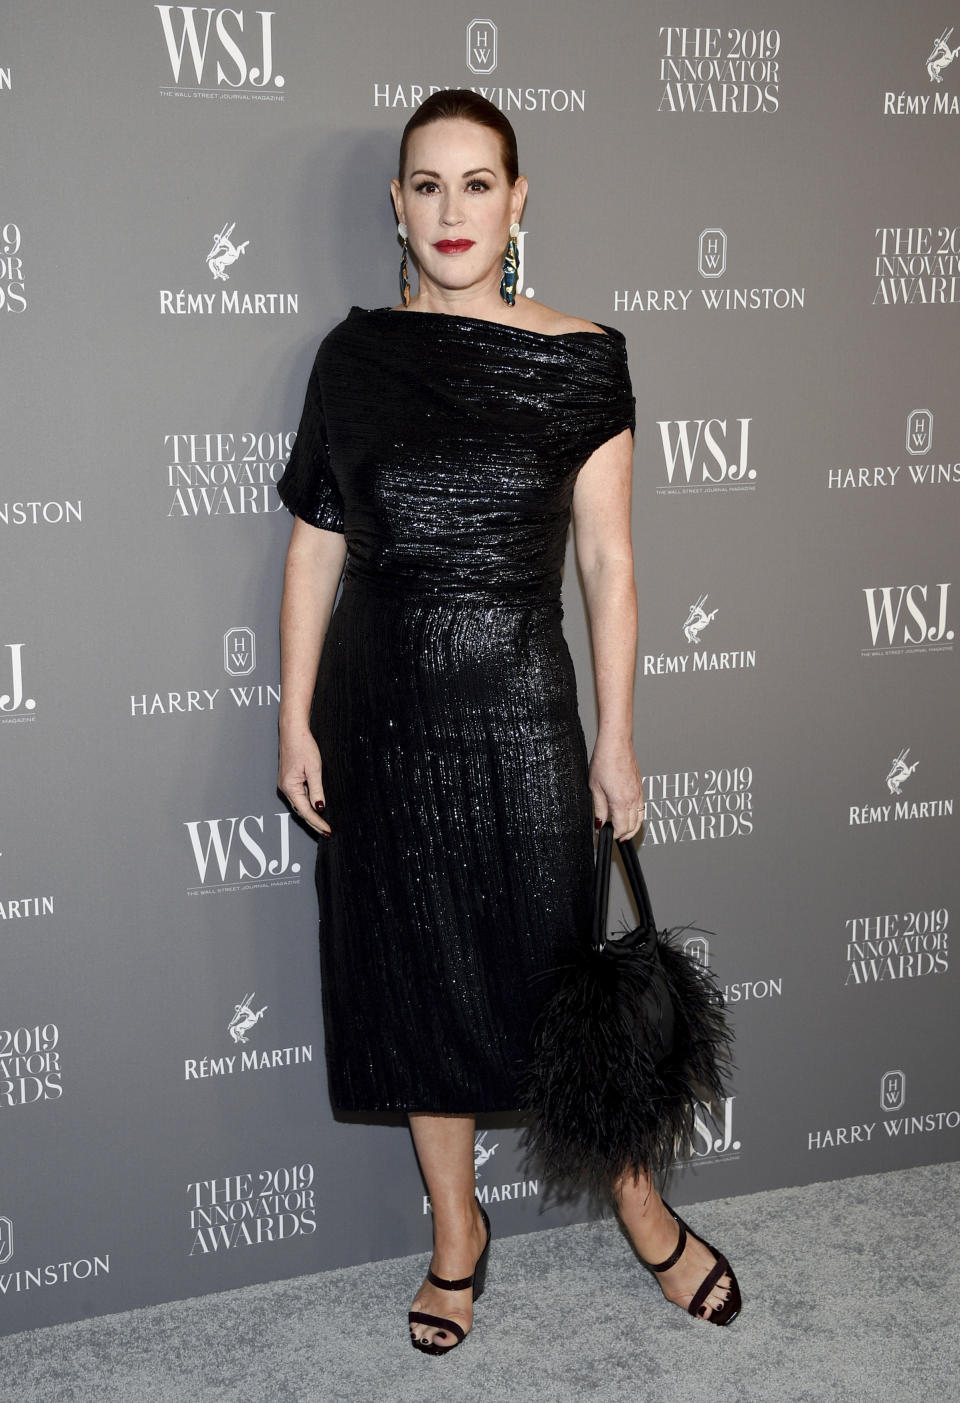 FILE - Molly Ringwald attends the WSJ Magazine Innovator Awards on Wednesday, Nov. 6, 2019, in New York. Ringwald turns 55 on Feb. 18. (Photo by Evan Agostini/Invision/AP, File)